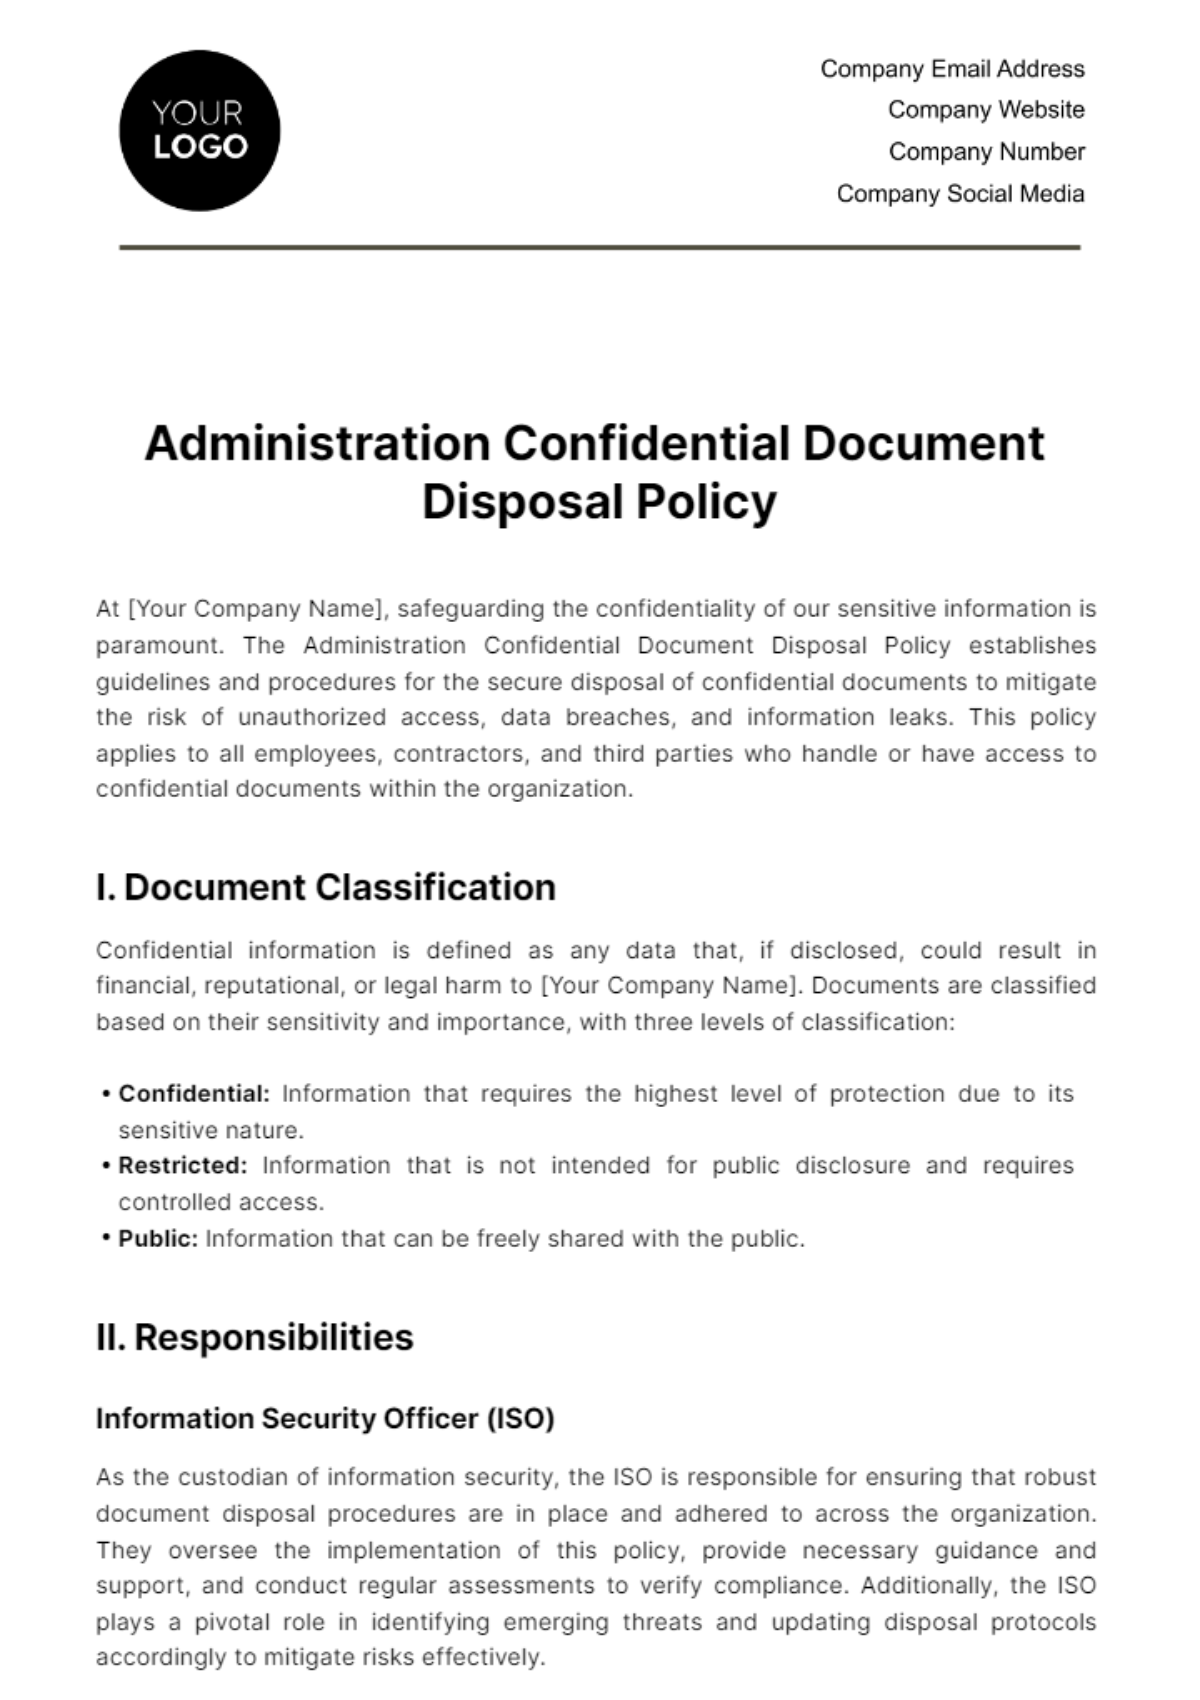 Administration Confidential Document Disposal Policy Template